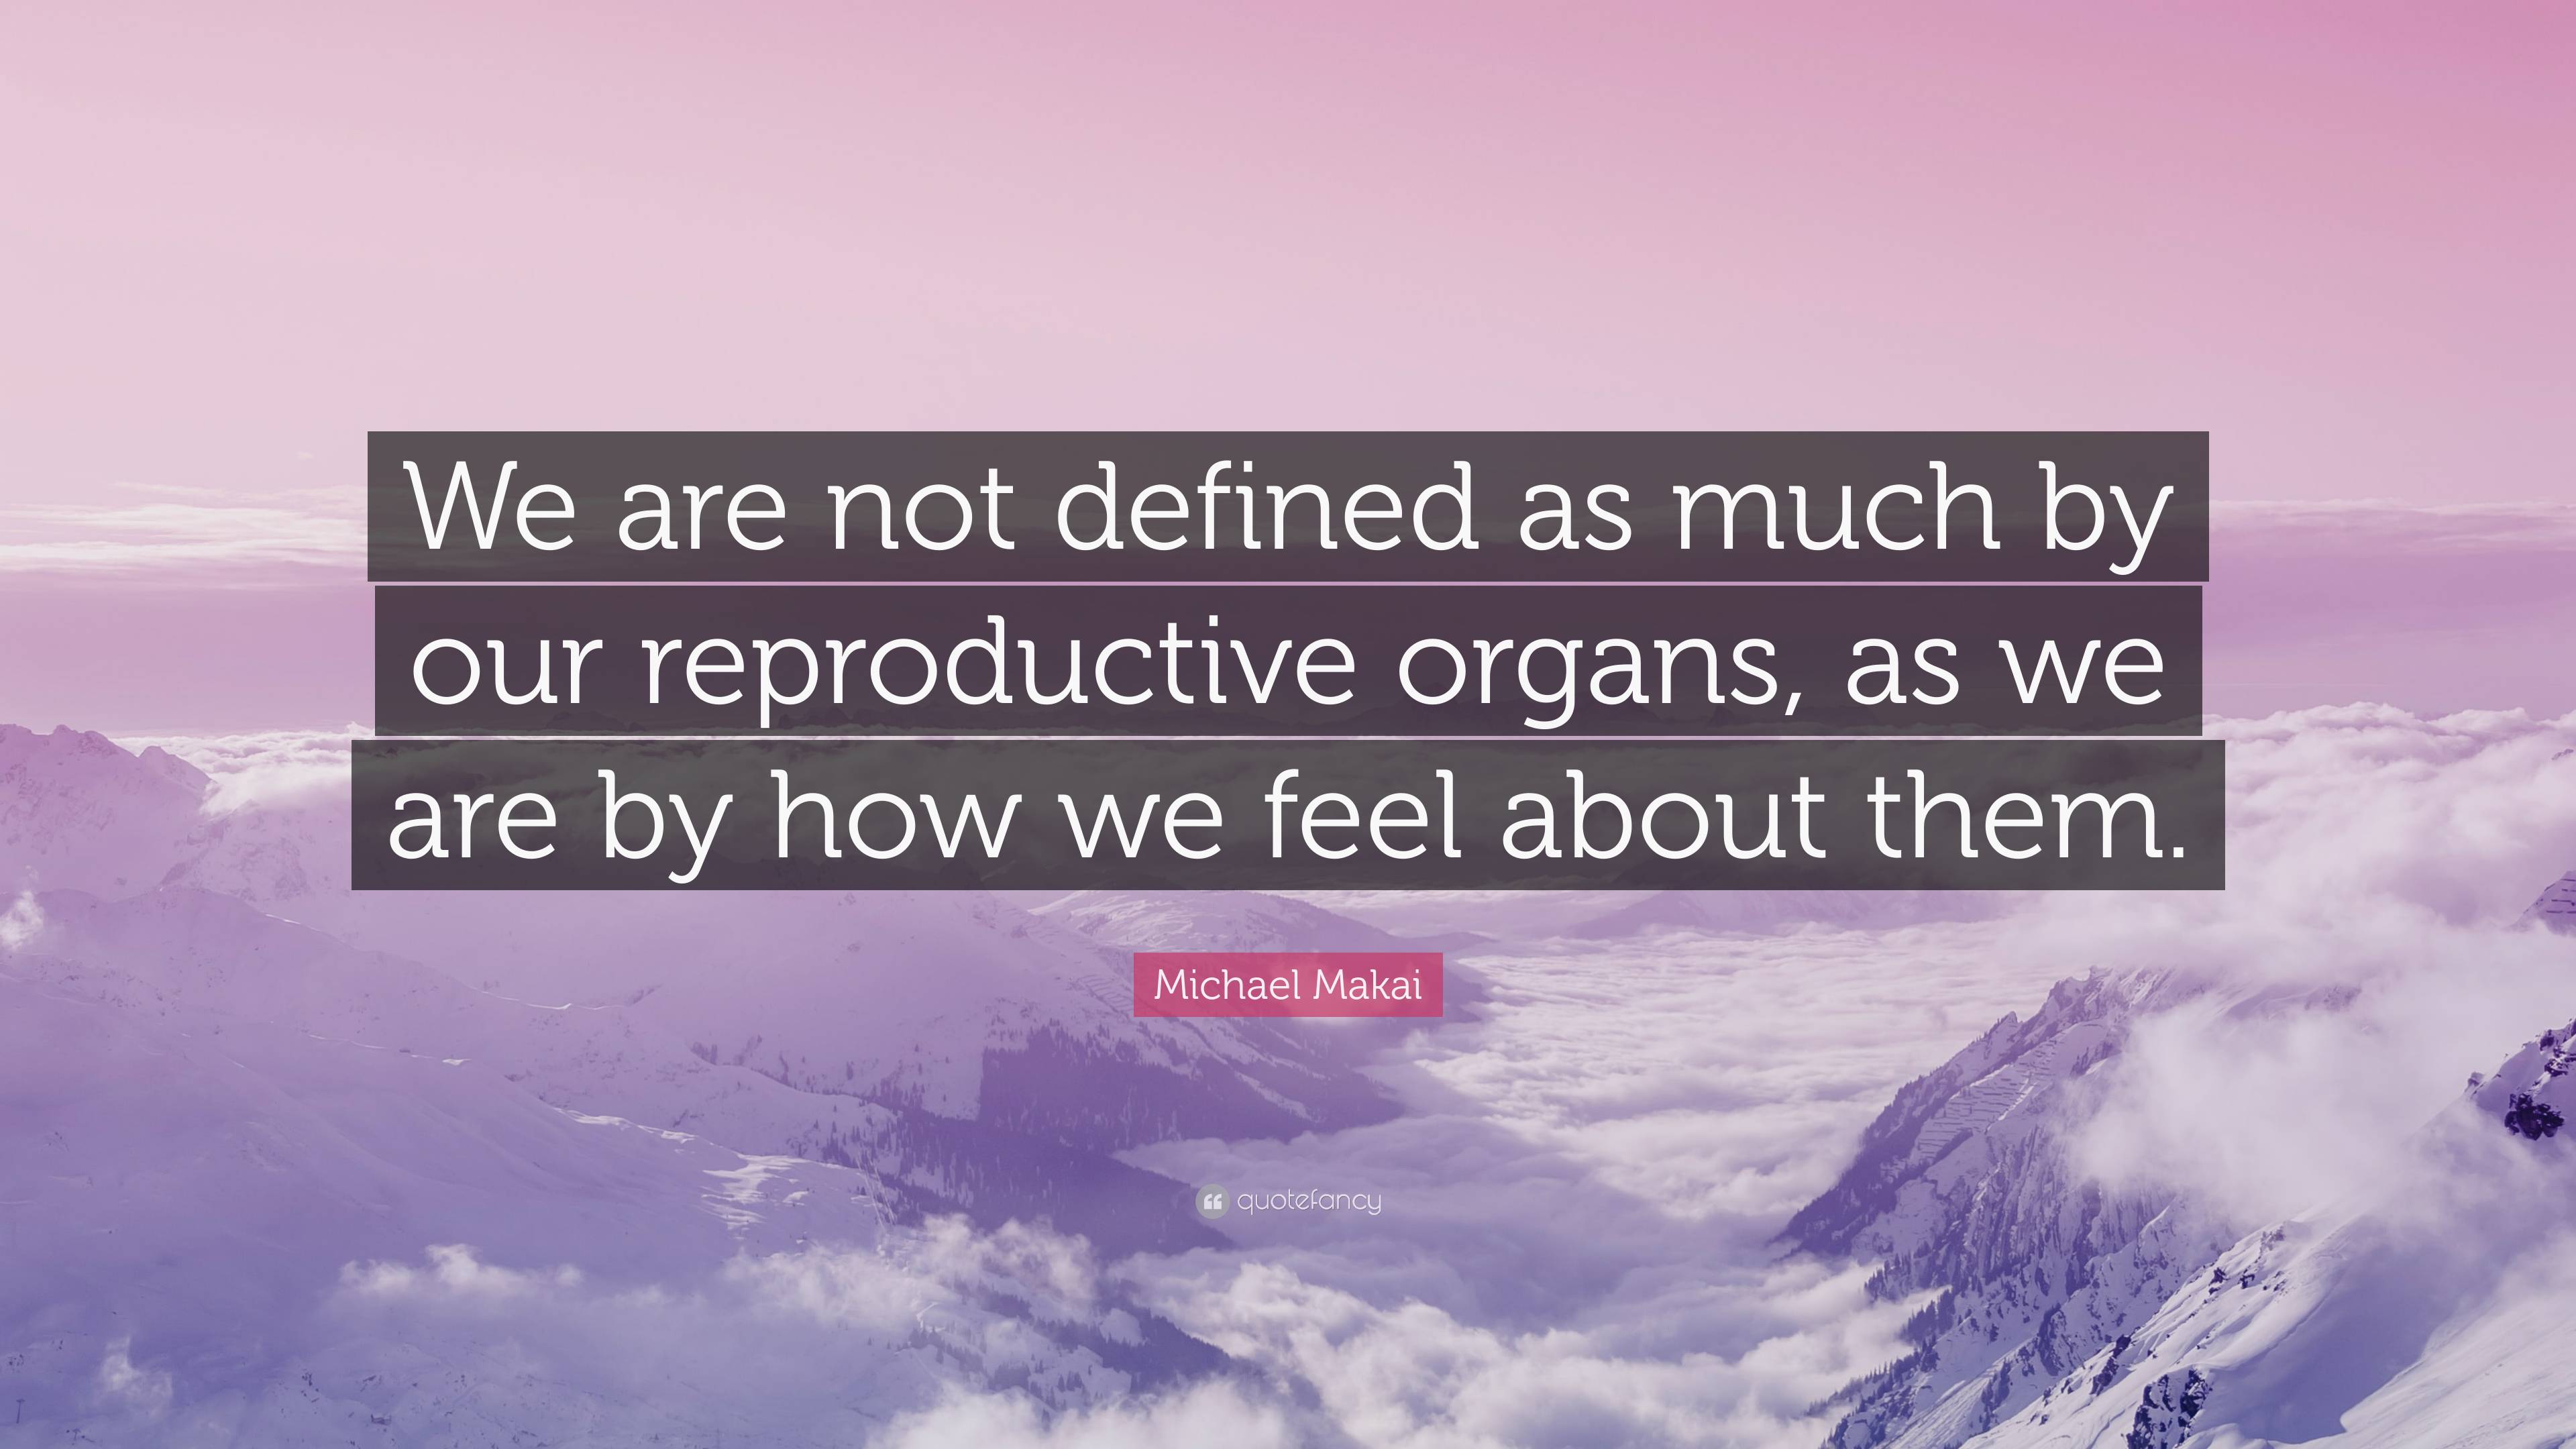 Michael Makai Quote: “We are not defined as much by our reproductive ...